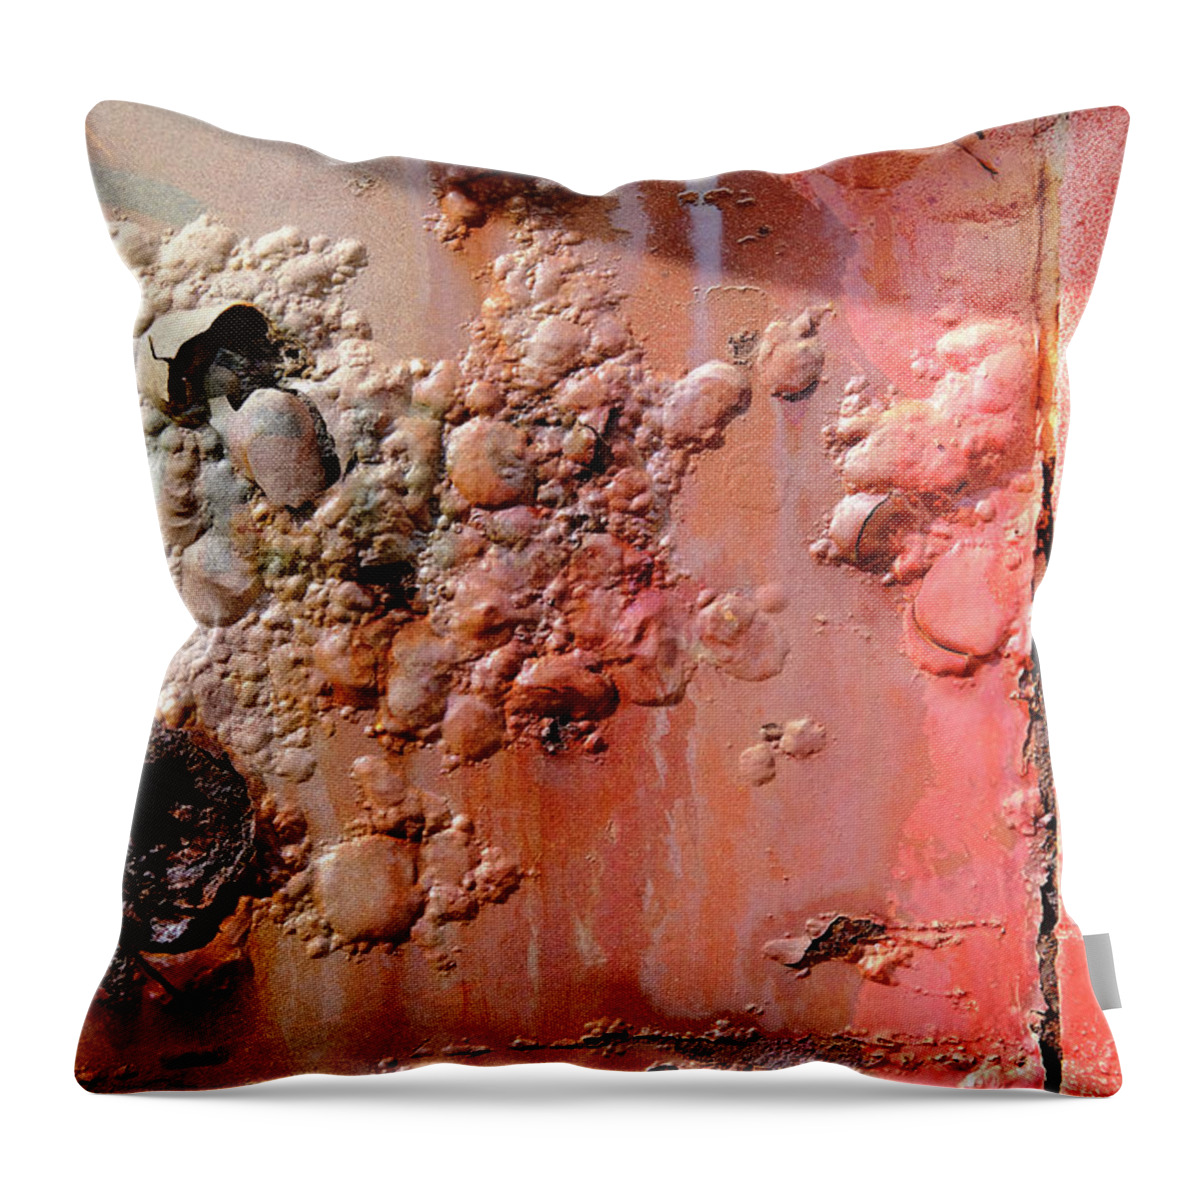 Decay Throw Pillow featuring the photograph Bubbles by Kreddible Trout